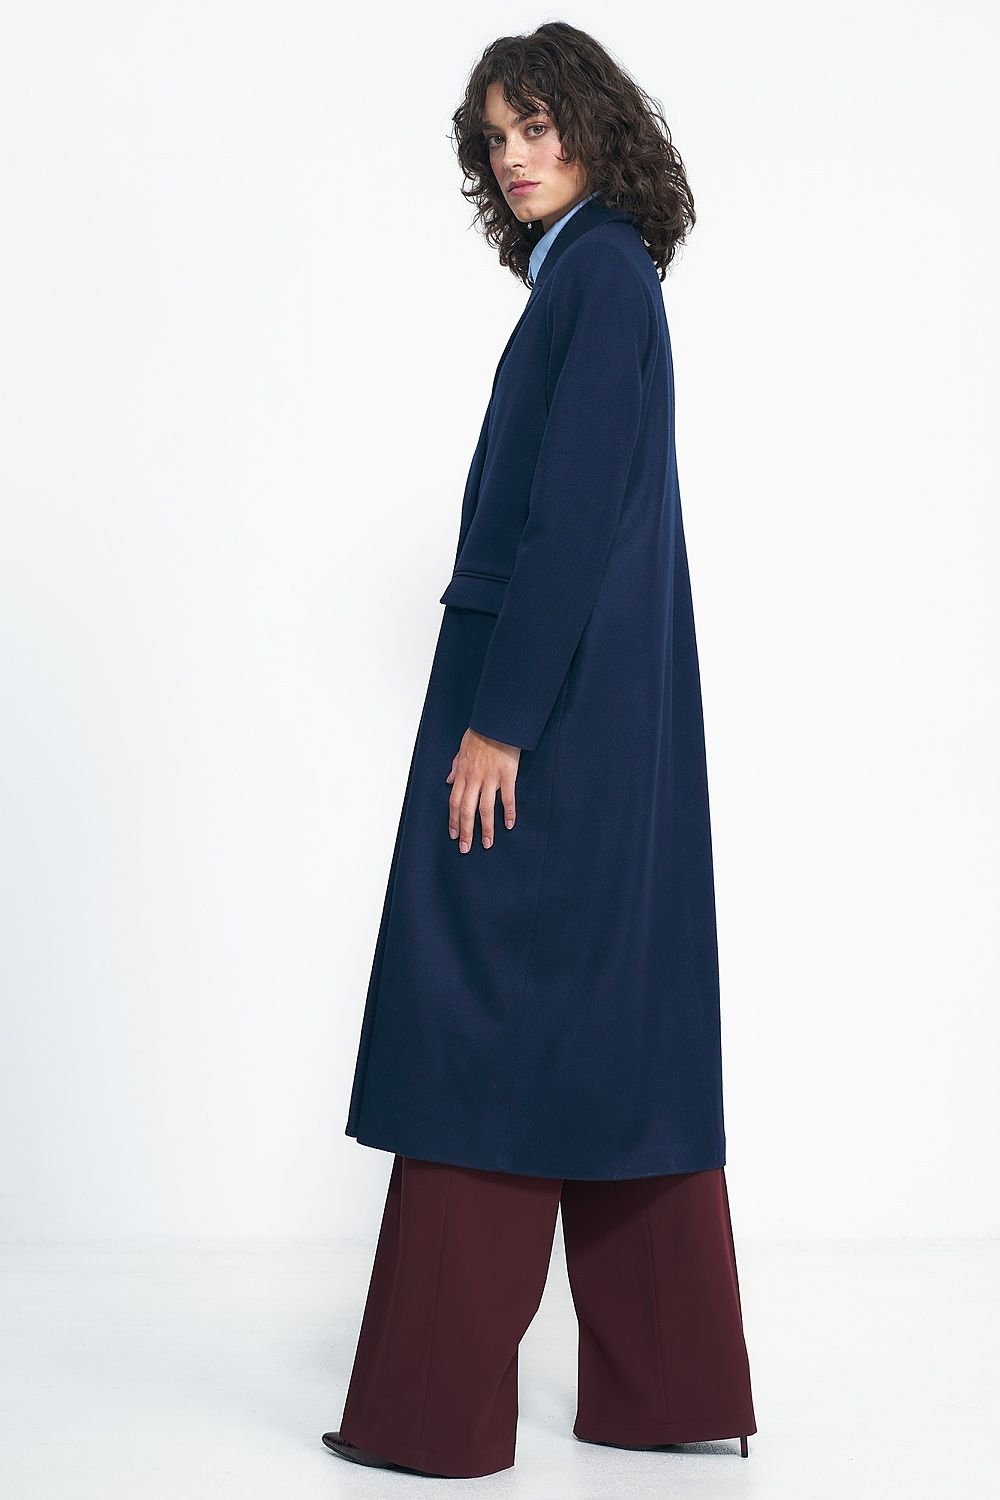 Sona Double Breasted Long Coat in Navy Blue